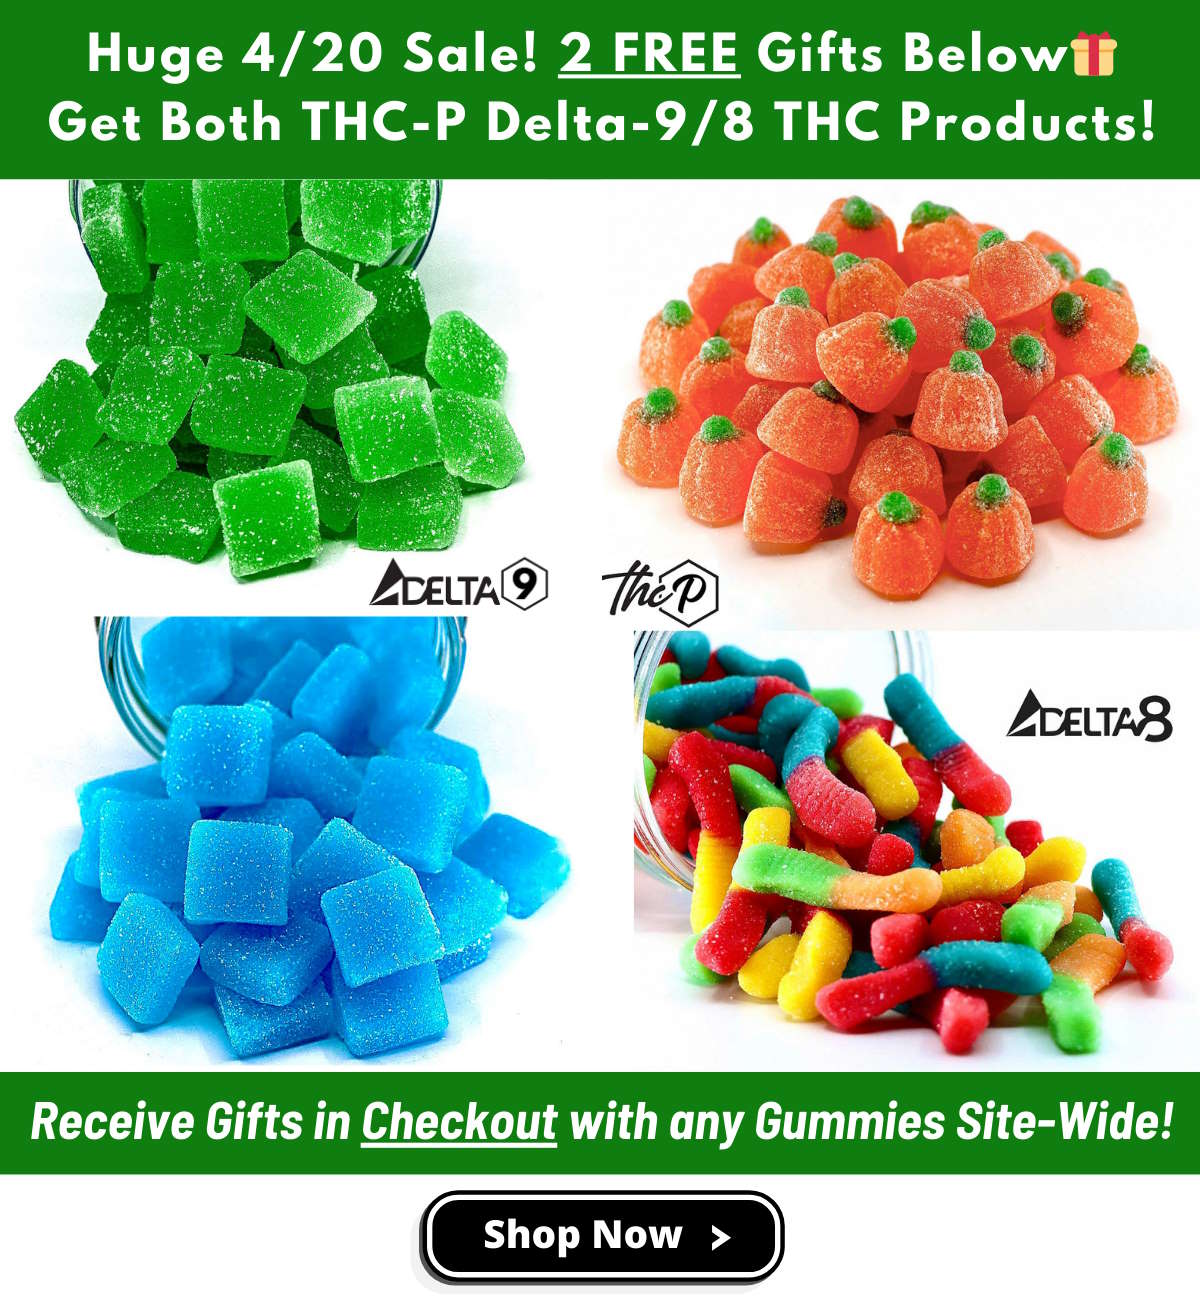 2 Free THCP or Delta-9 Gummies Products with Any Gummies in Checkout